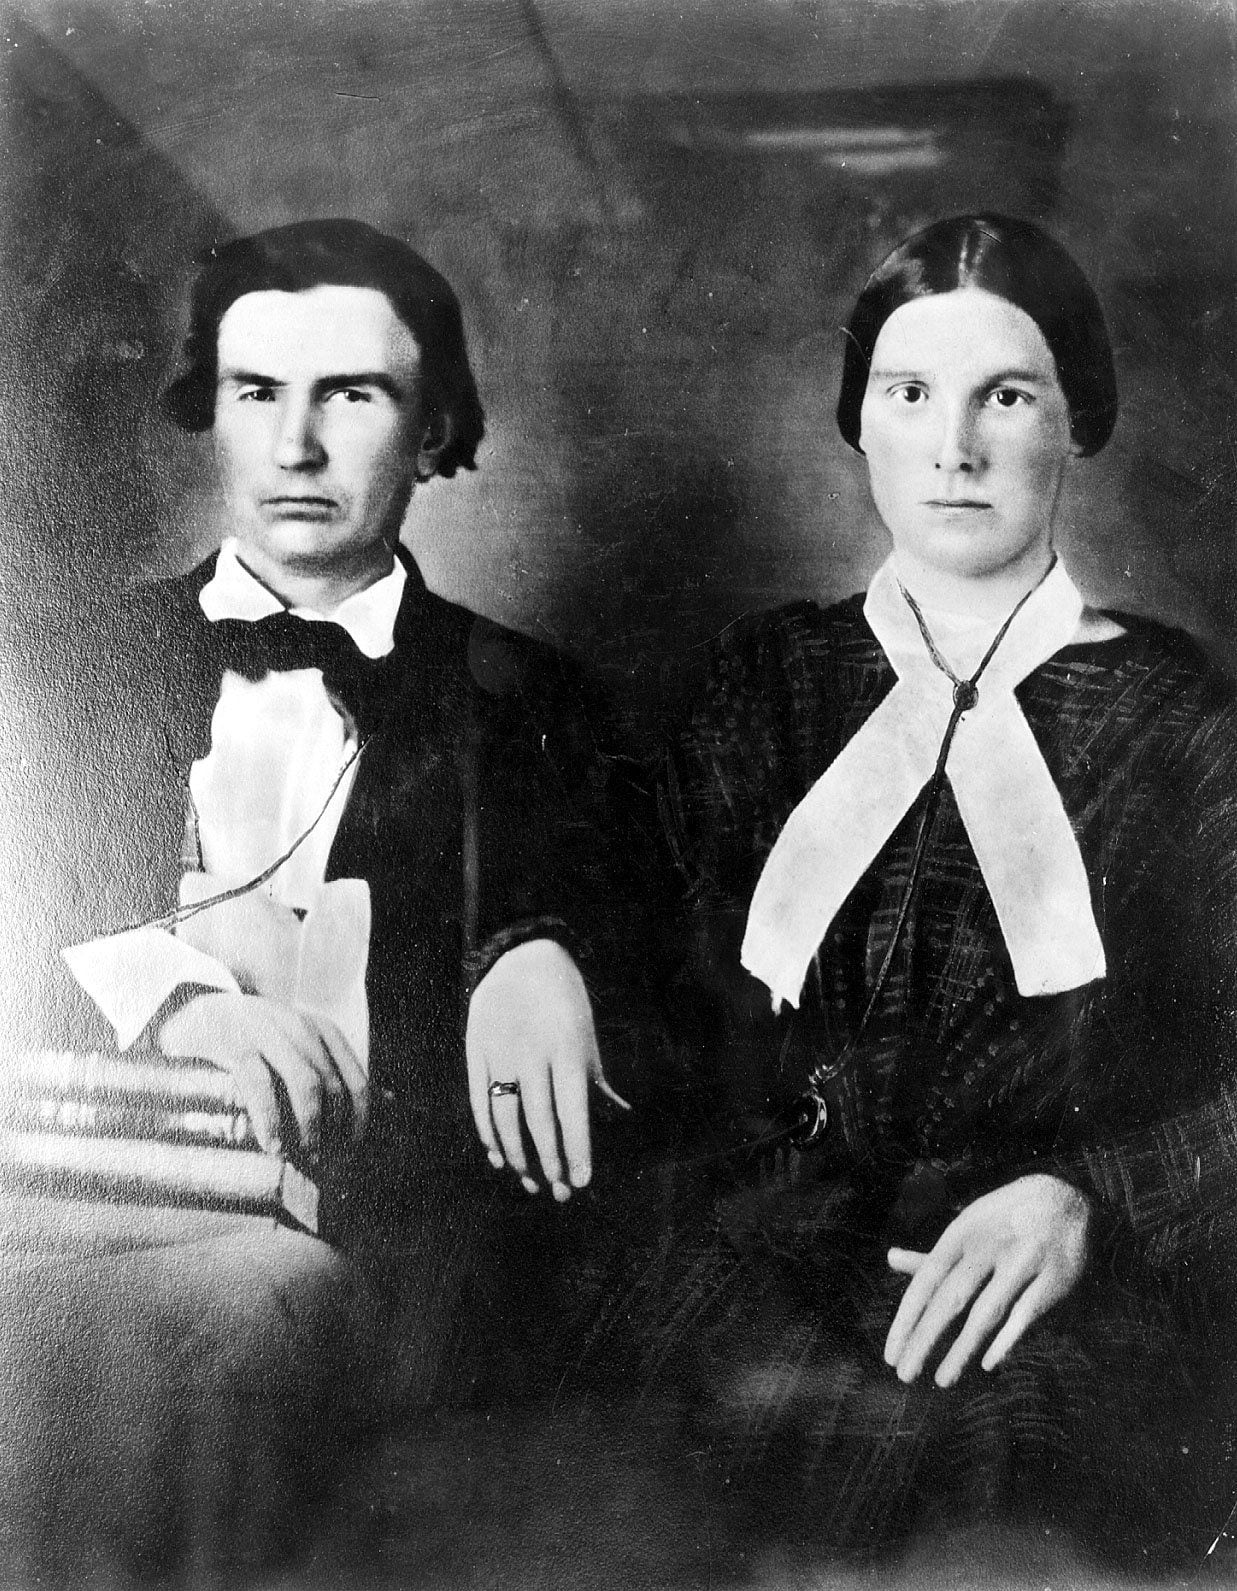 Dallas founder John Neely Bryan and wife Margaret Beeman Bryan in an undated photo.